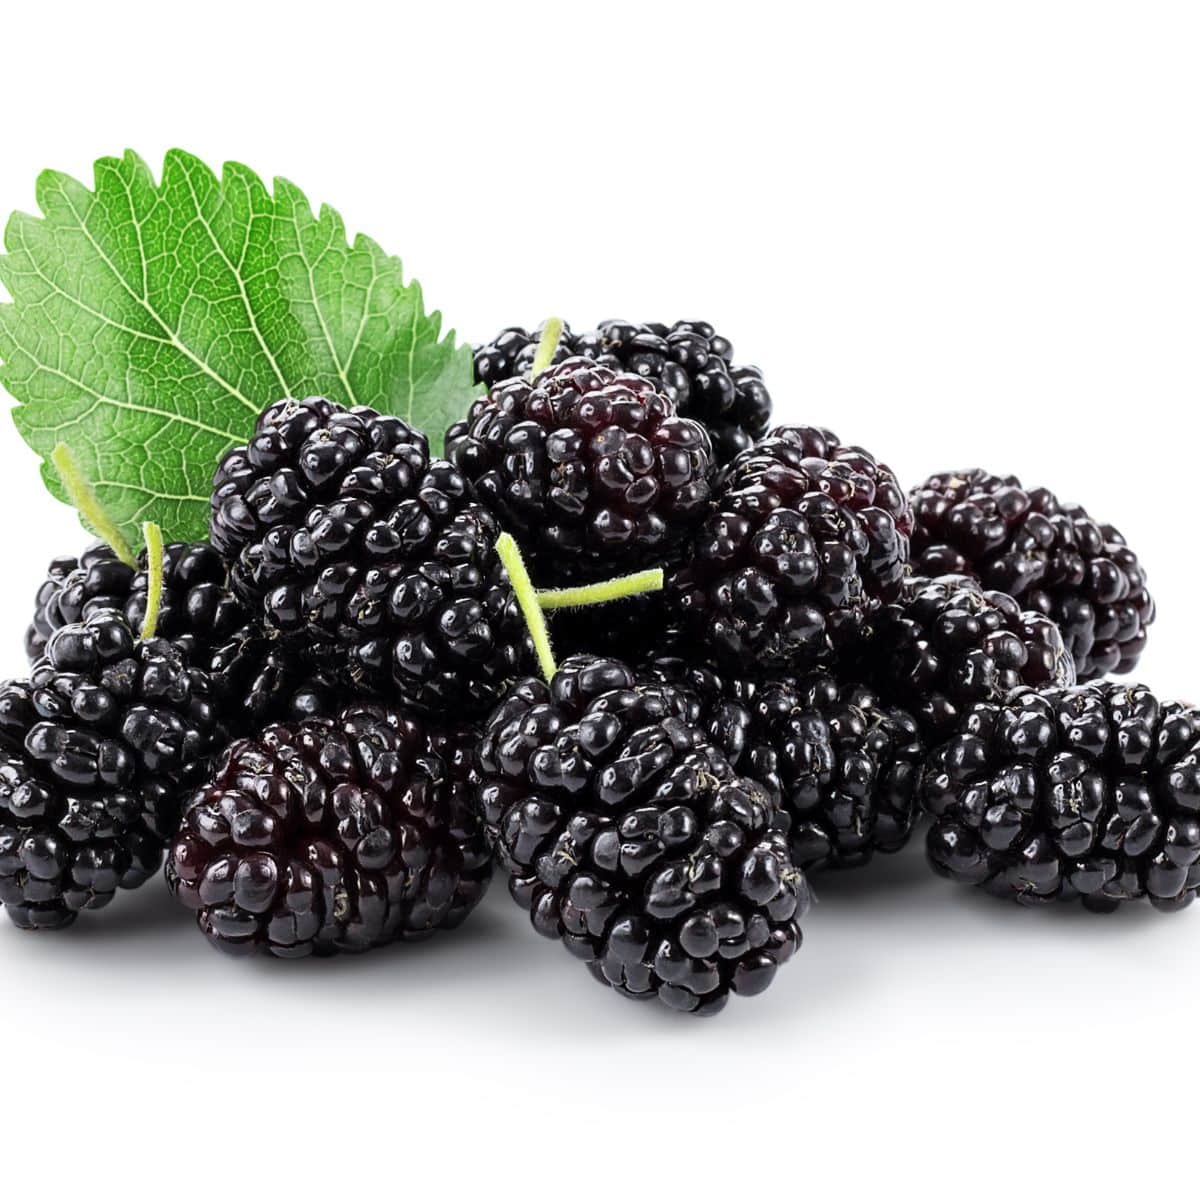 Black mulberry on a white background.